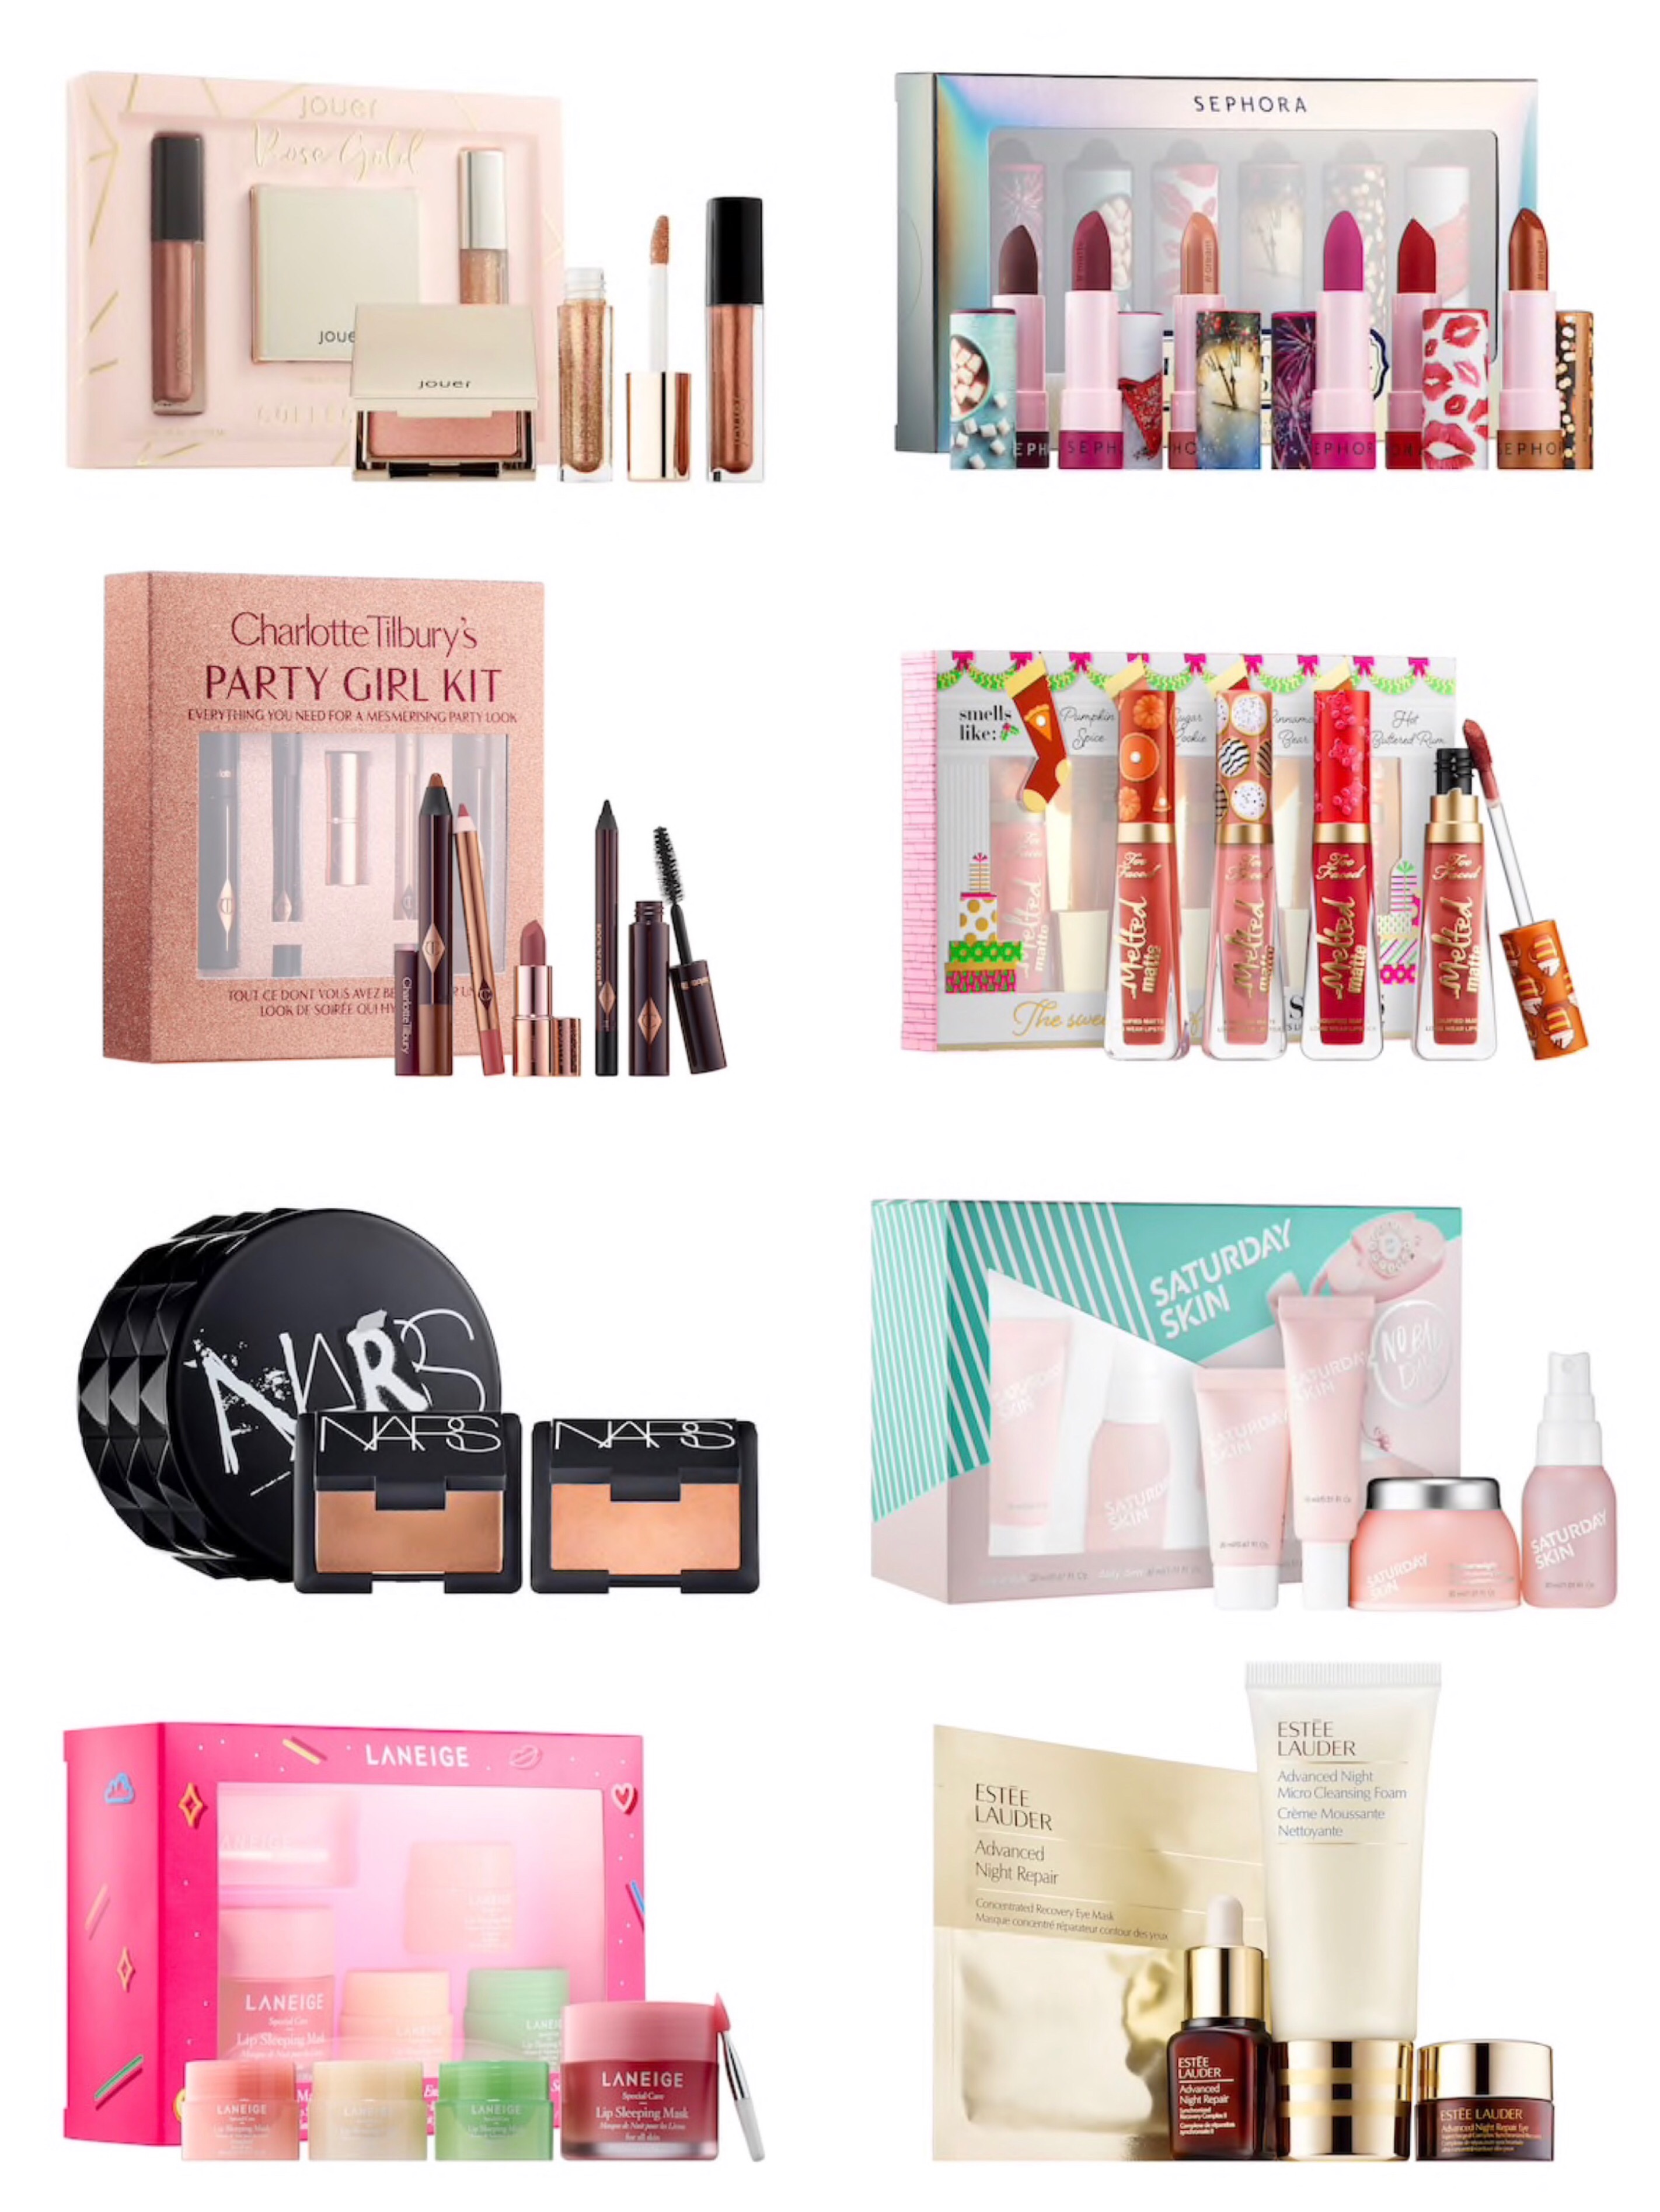 The 25 Best Sephora Gift Sets for Any Budget